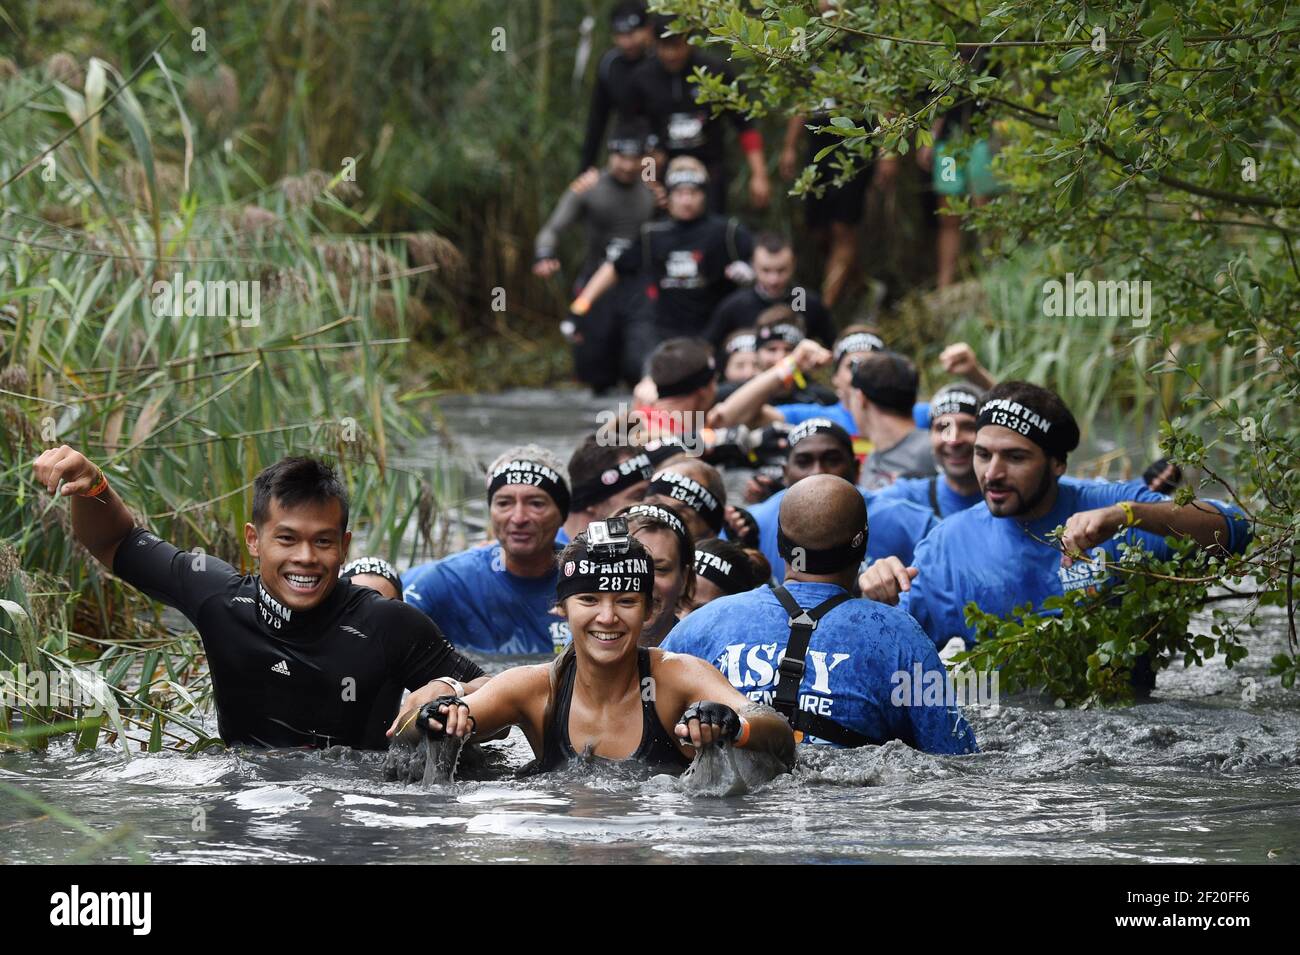 Runners during the Reebok Spartan Race in Jablines, on September 19, 2015.  The Spartan Race is a race in the mud with multiple obstacles. Photo  Philippe Millereau / KMSP /DPPI Stock Photo - Alamy